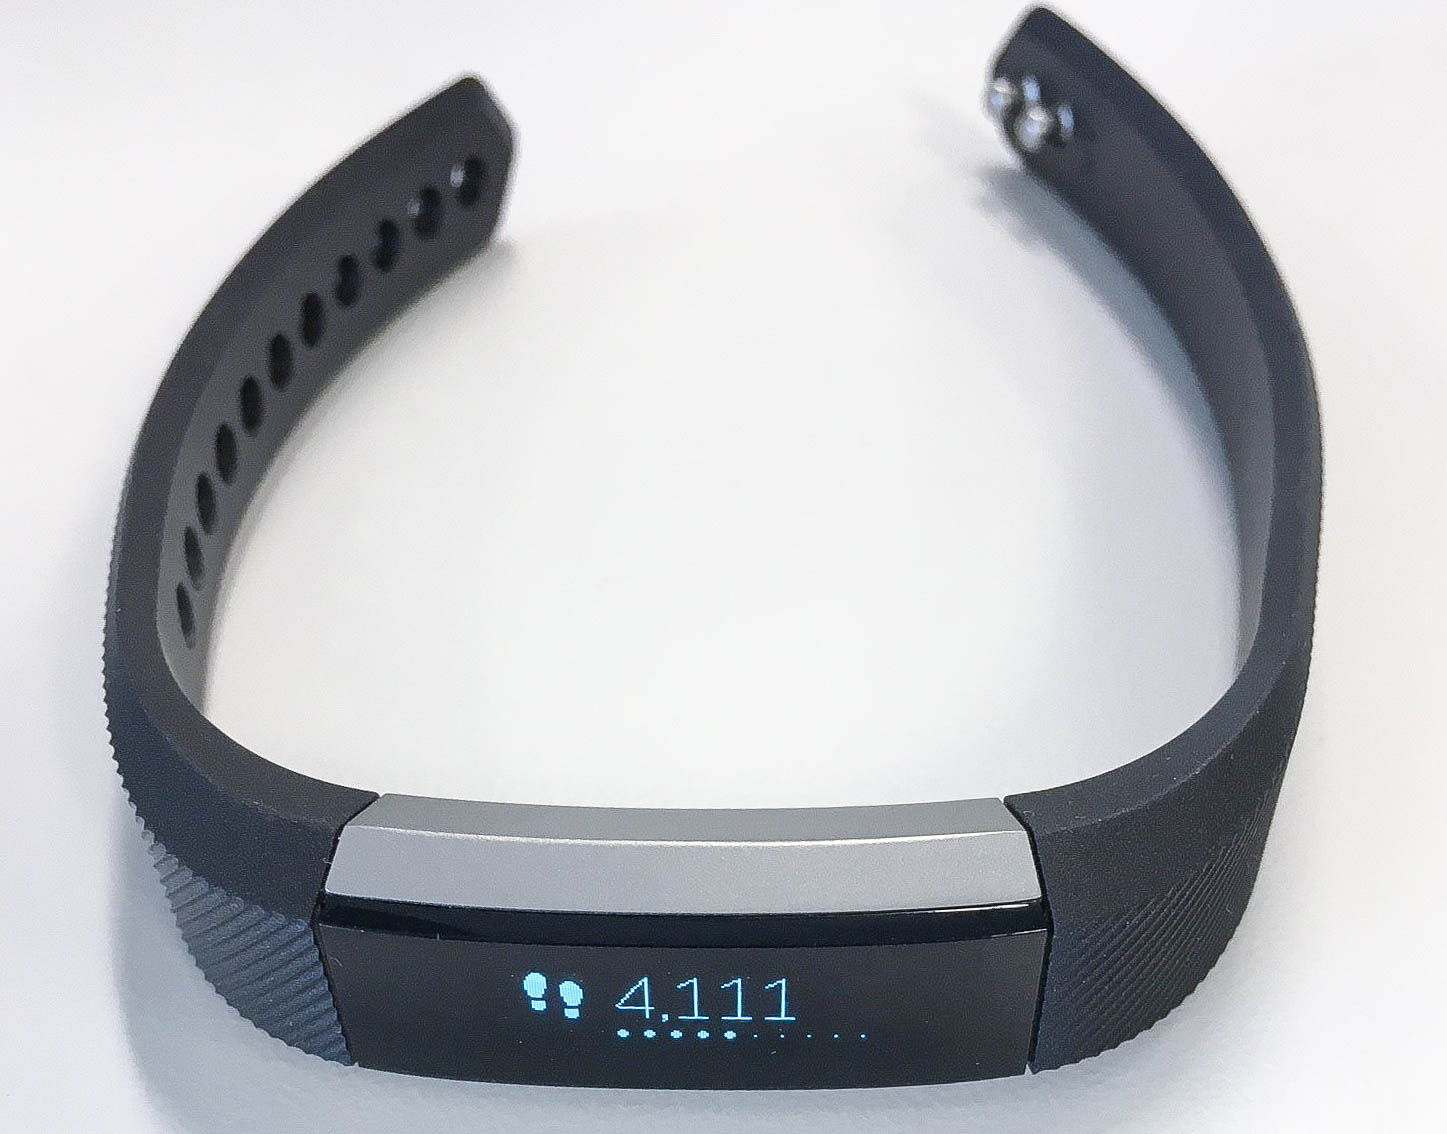 Fitbit Alta Unboxing & First Look - Fitness Band With Smart Watch Features  - YouTube